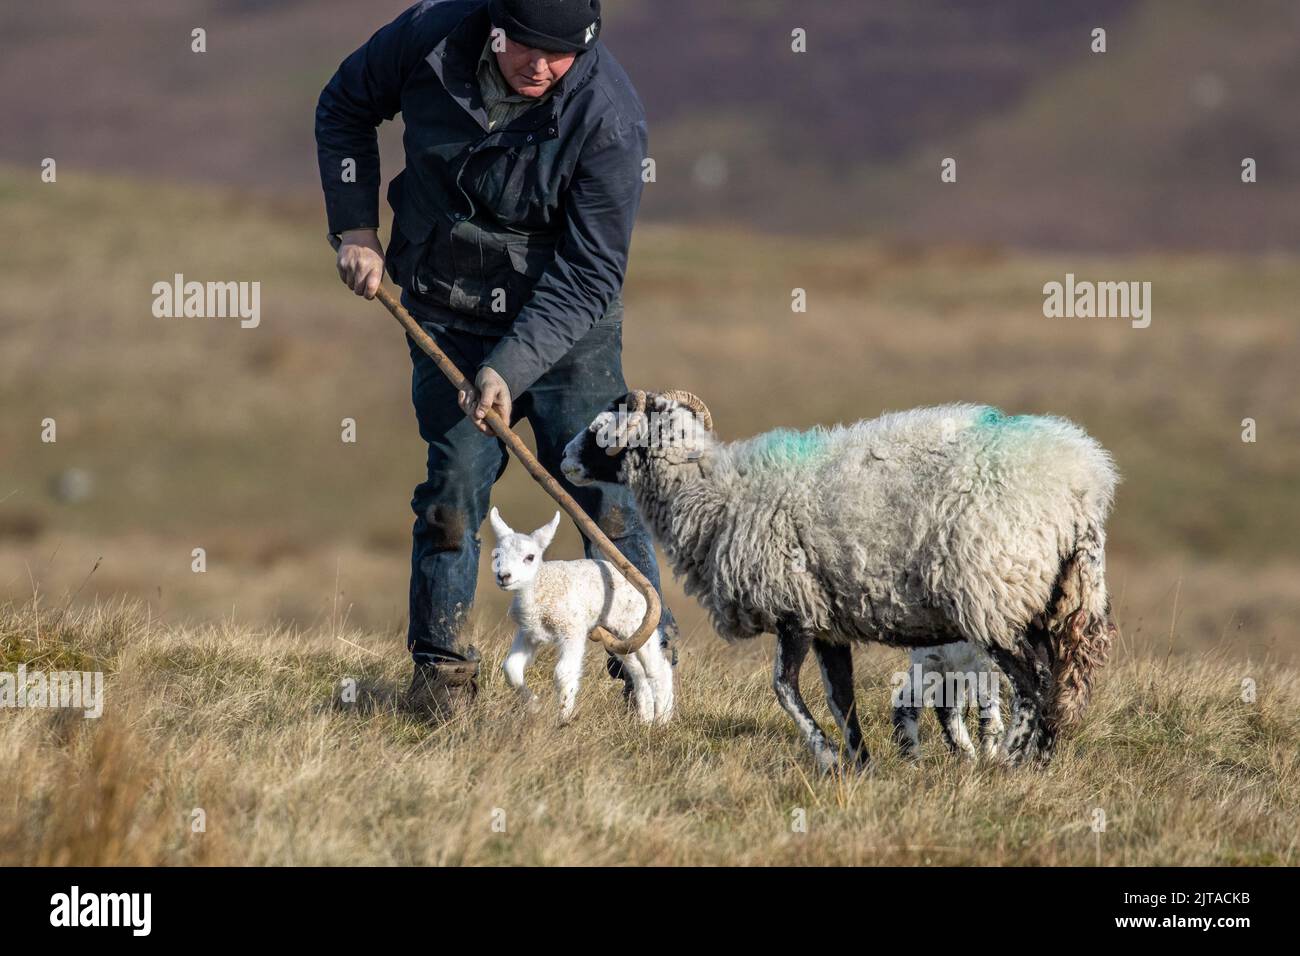 Farmer in action catching lamb with a shepherd's crook to tend to newly born sheep, Yorkshire, England, UK Stock Photo